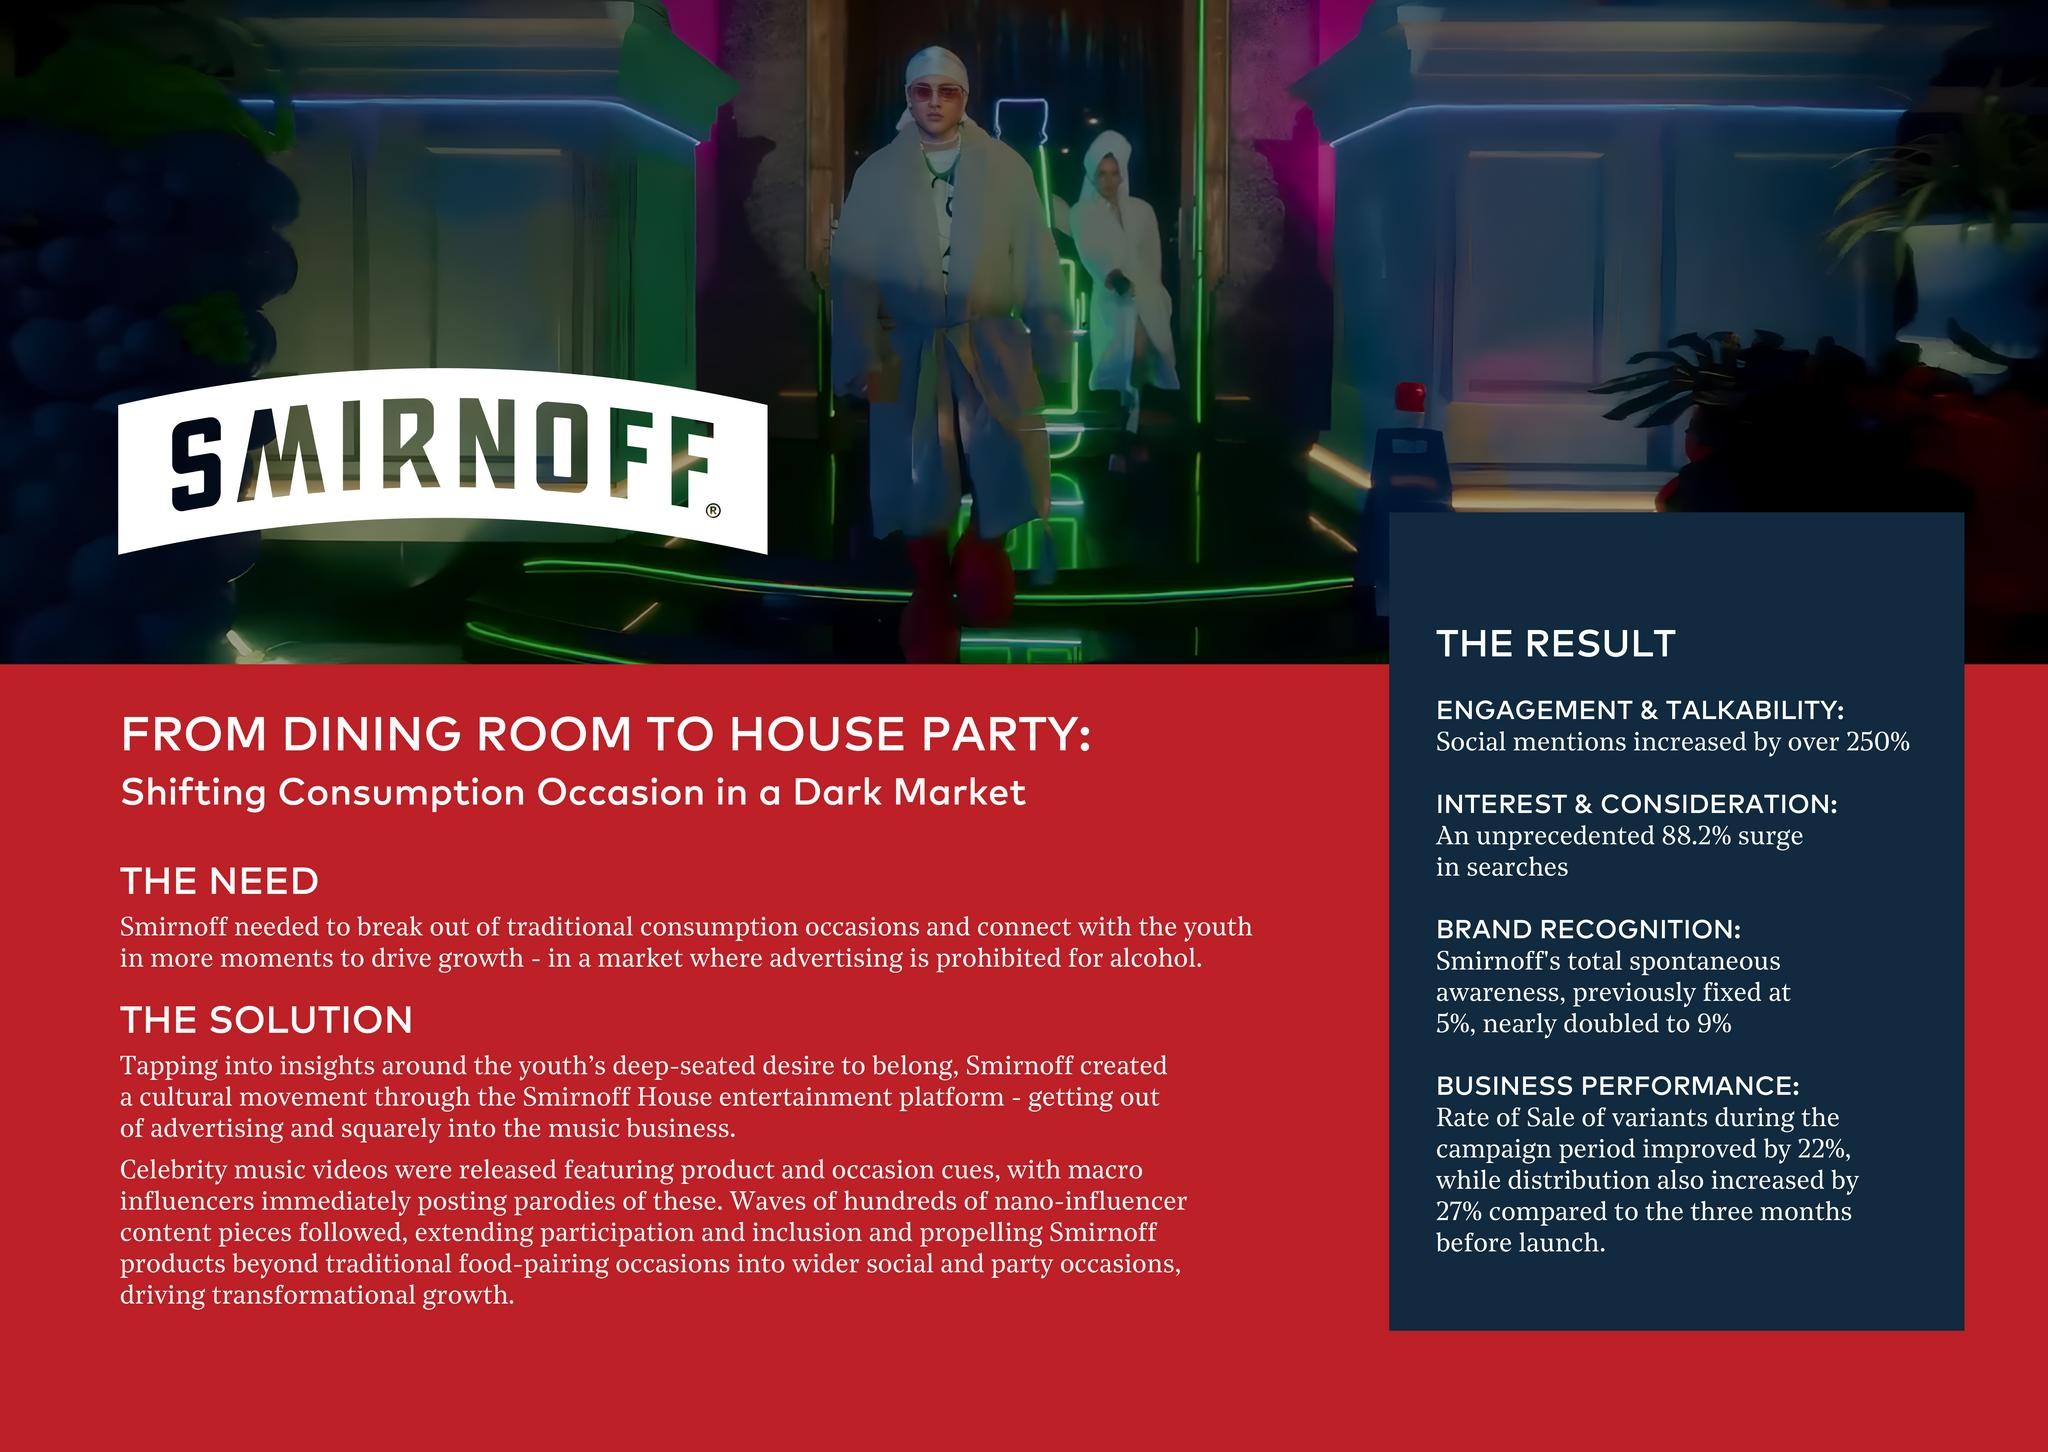 Smirnoff | From Dining Room to House Party: Shifting Consumption Occasion in a Dark Market